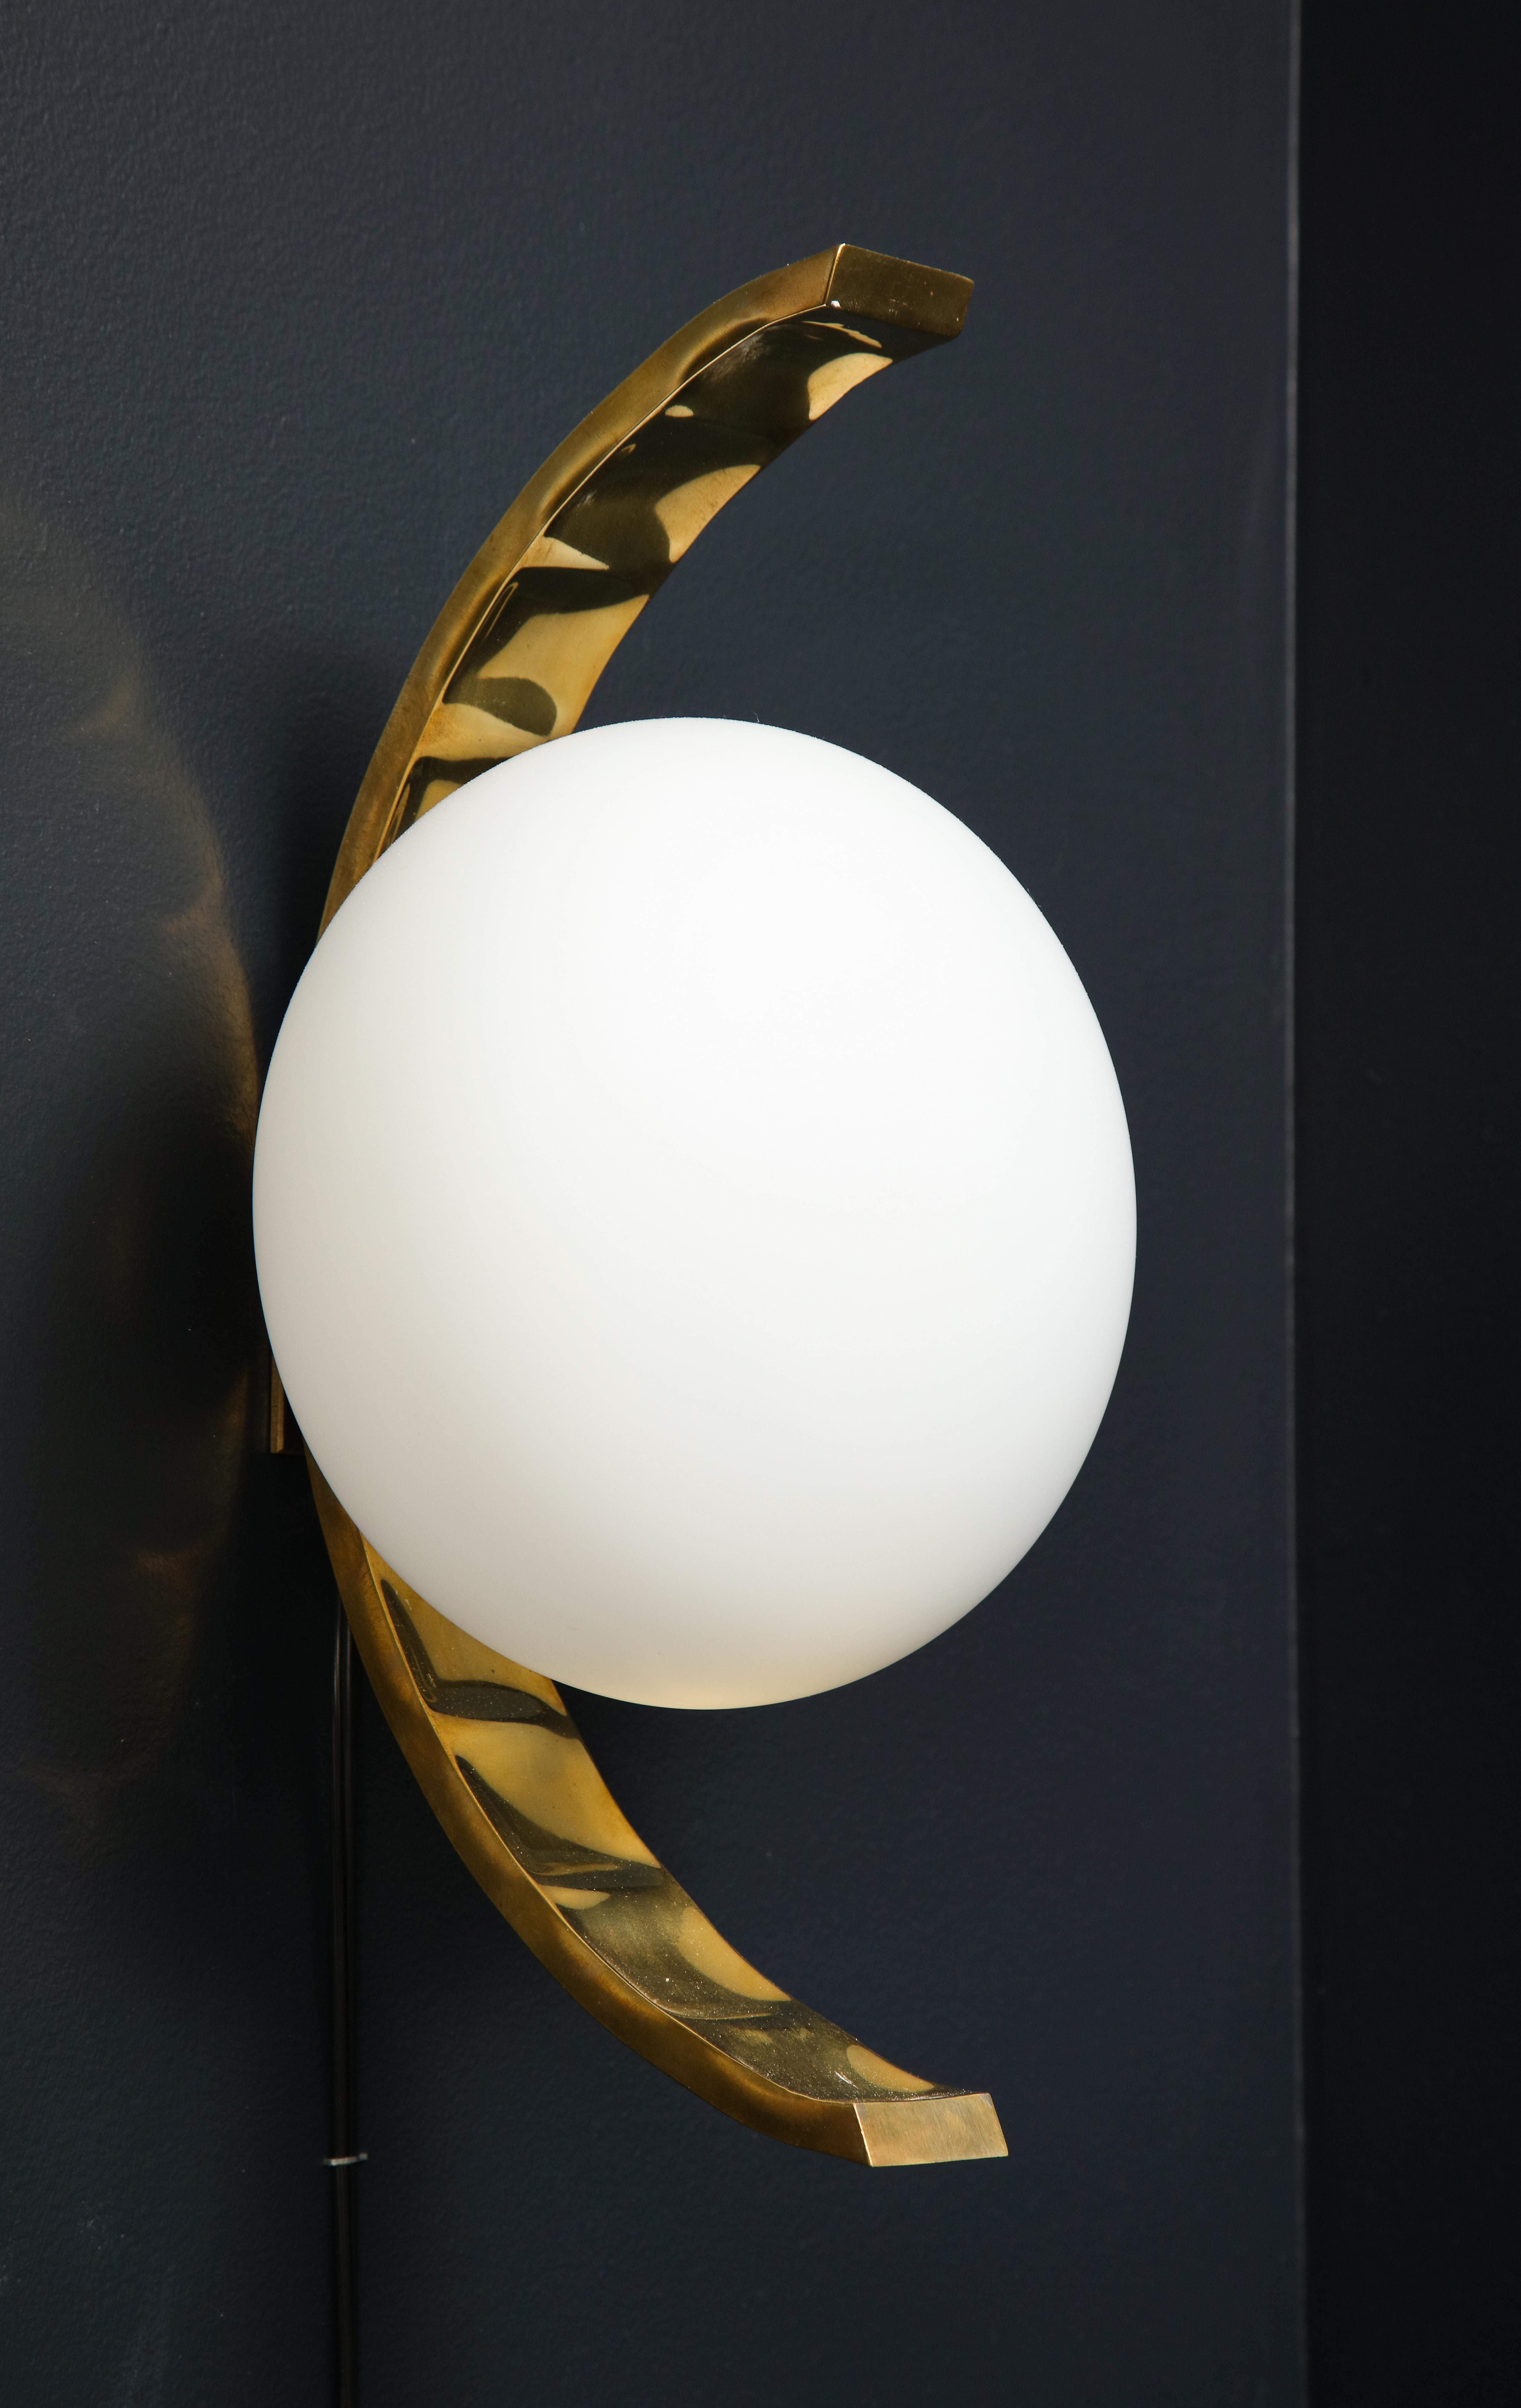 Pair of minimalist design white glass globe and brass sconces. A single large white glass globe is centered on top of a curved, arched stamped brass frame. Beautiful Italian design. Wired for U.S. standards. Each light holds a medium base bulb.